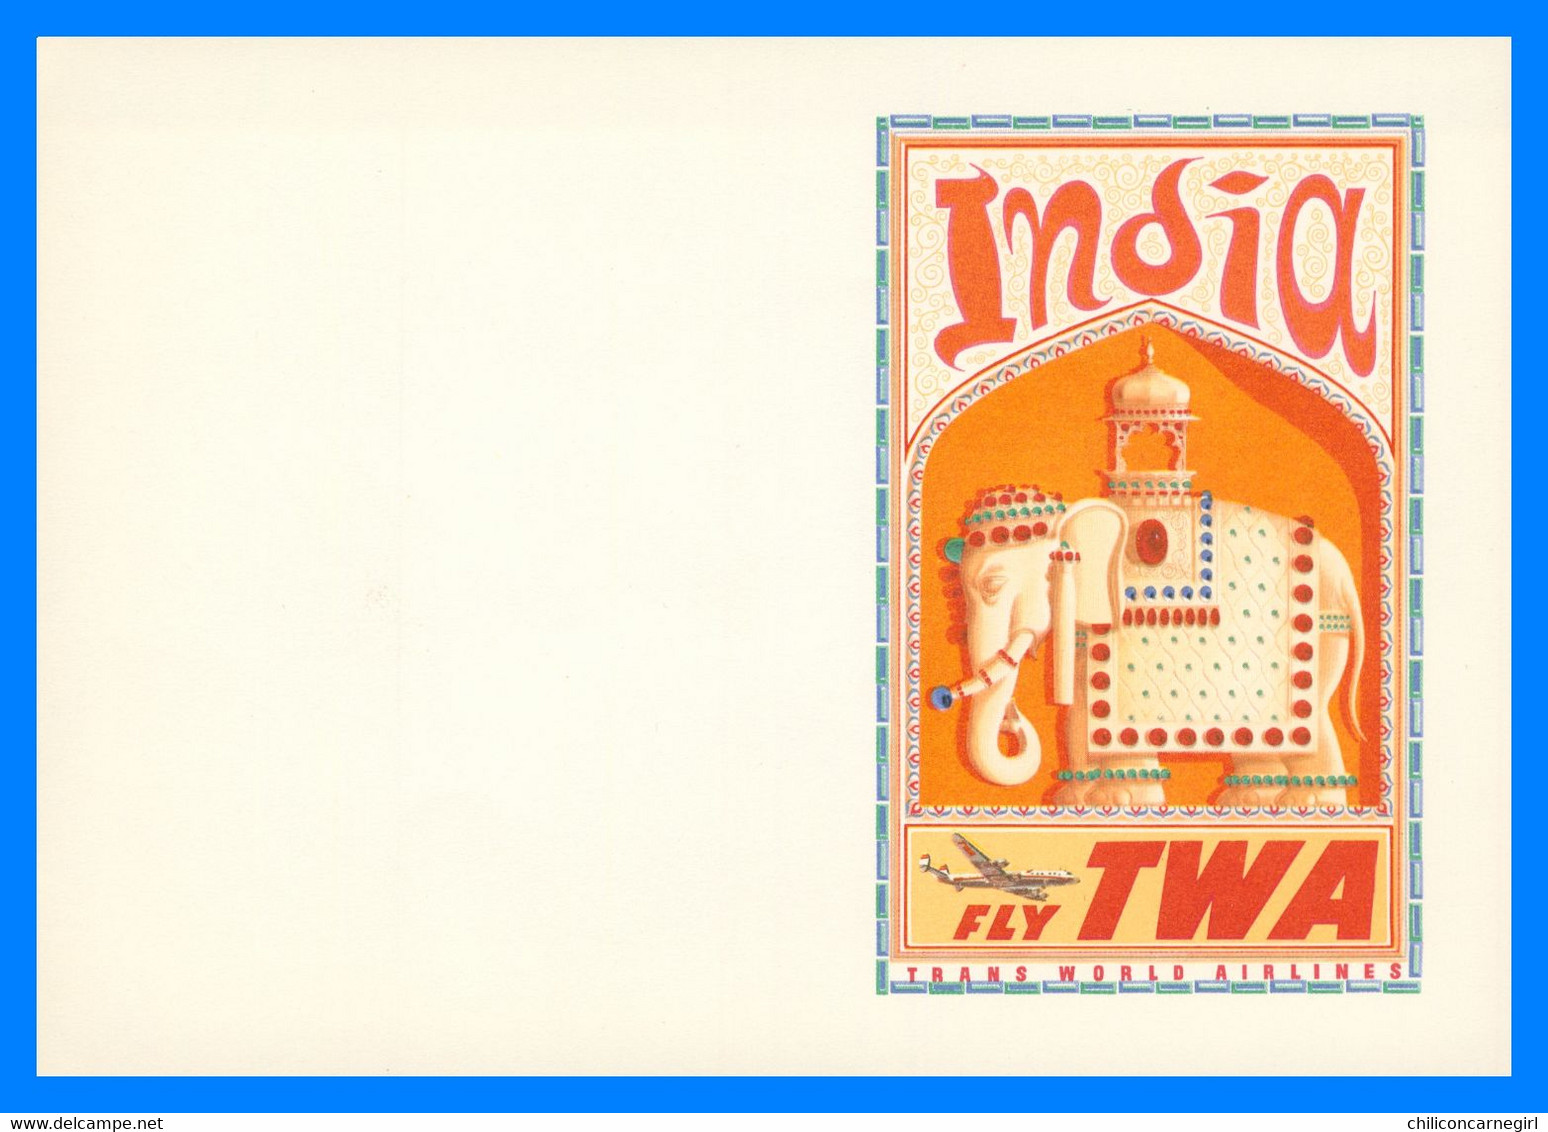 * Buvard 18 X 12,7 Cm - Litho In U.S.A. - INDIA FLY TWA - TRANS WORLD AIRLINES - Avion - Plane - Aircraft - Transports